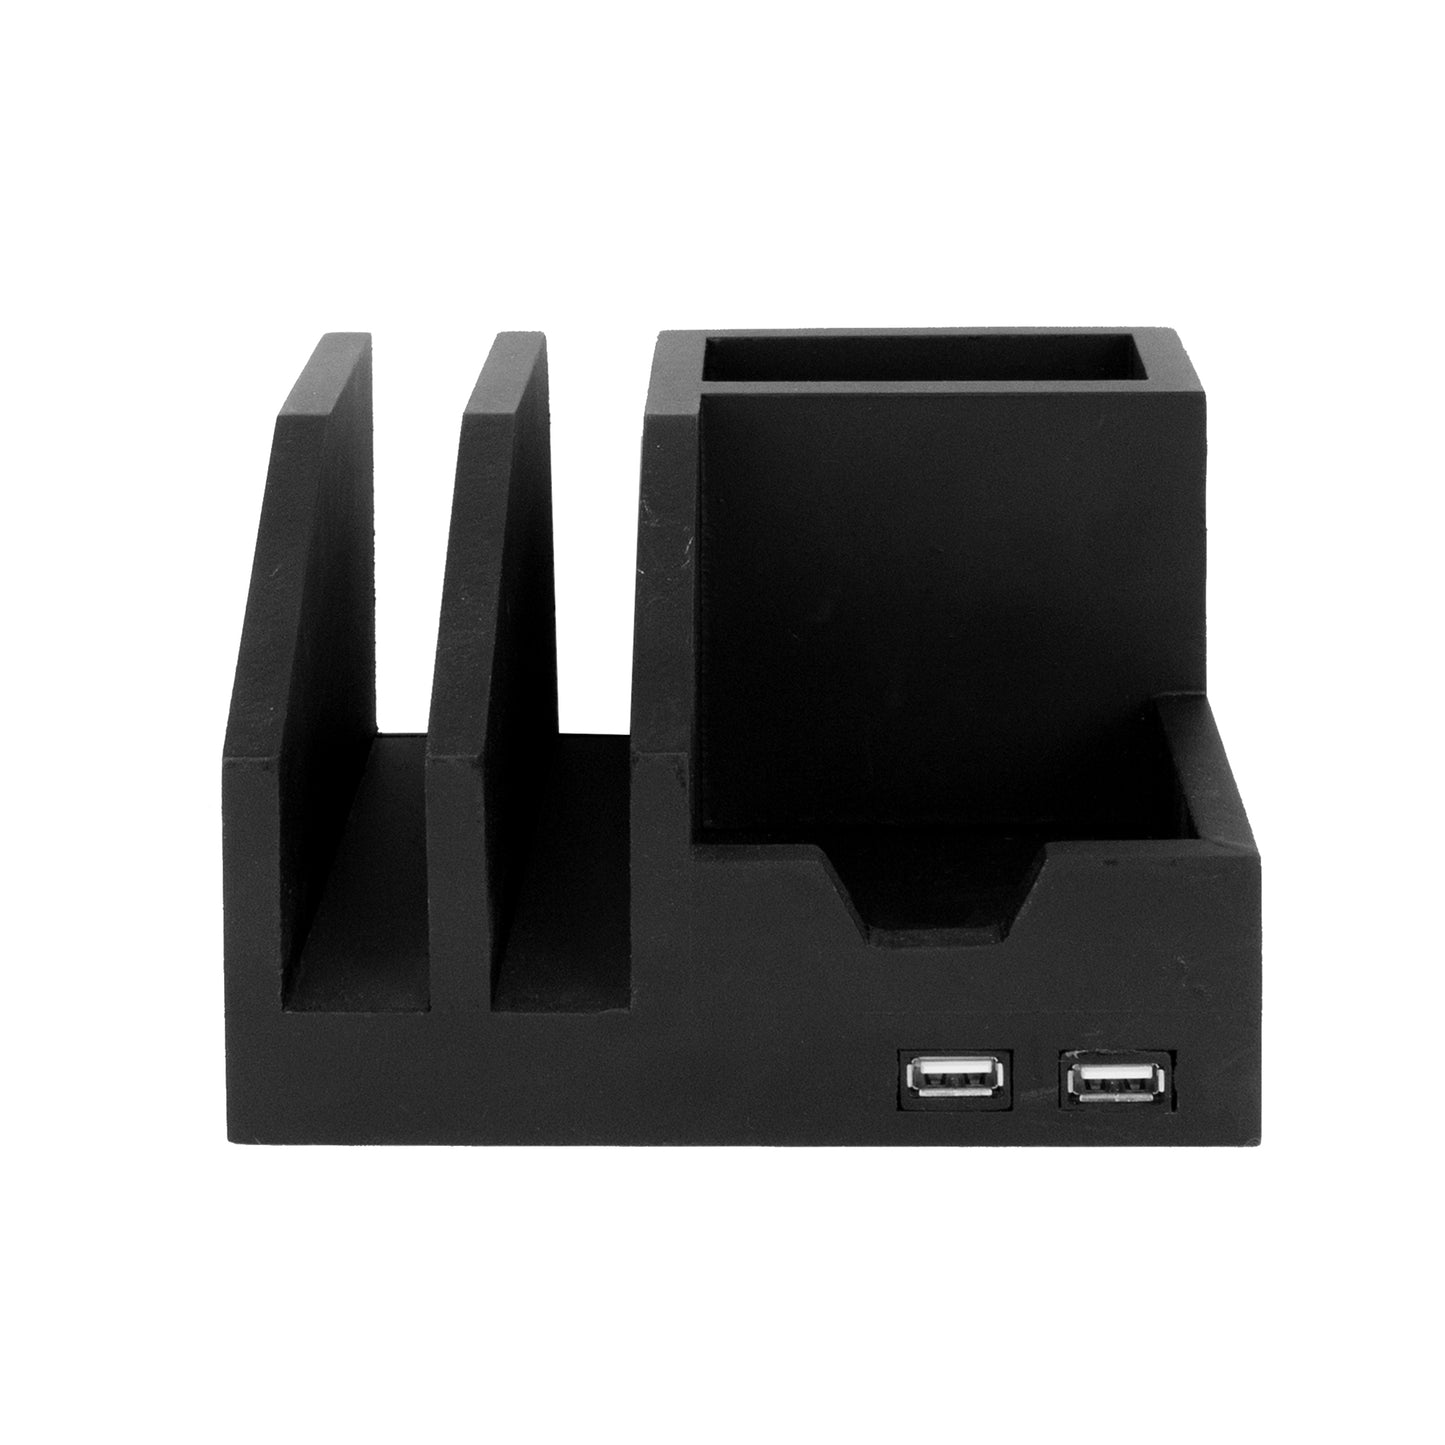 All-in-One Desk File Organizer with USB Charger - Black